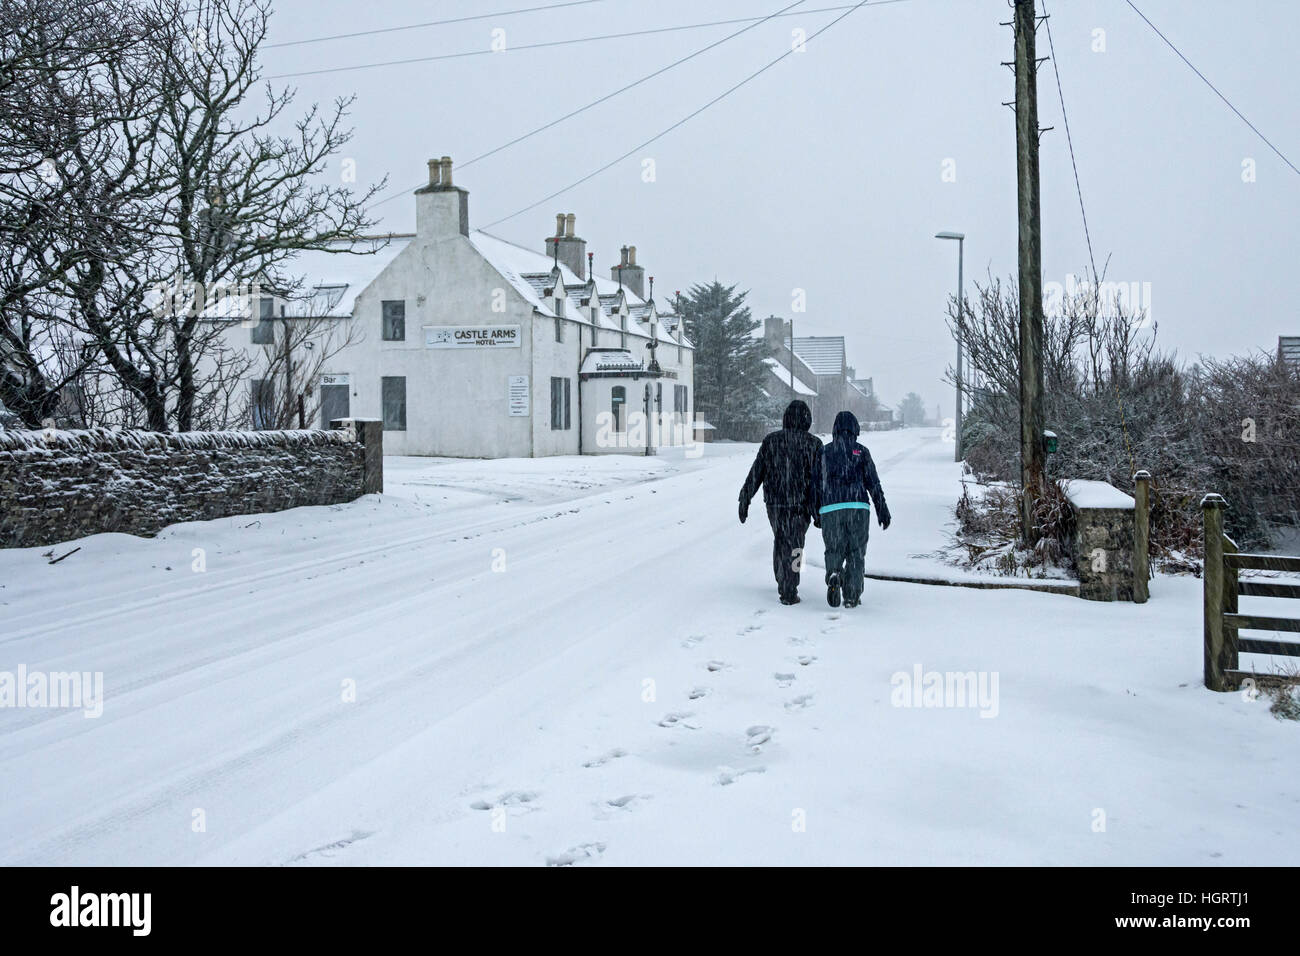 Mey, Caithness, Scotland, 12 Jan 2017. Heavy snow showers merged to give a covering of snow on the A836 road, the main road between Thurso and John o'Groats.  Outside the Castle Arms Hotel in the village of Mey, Caithness, Scotland, UK Stock Photo